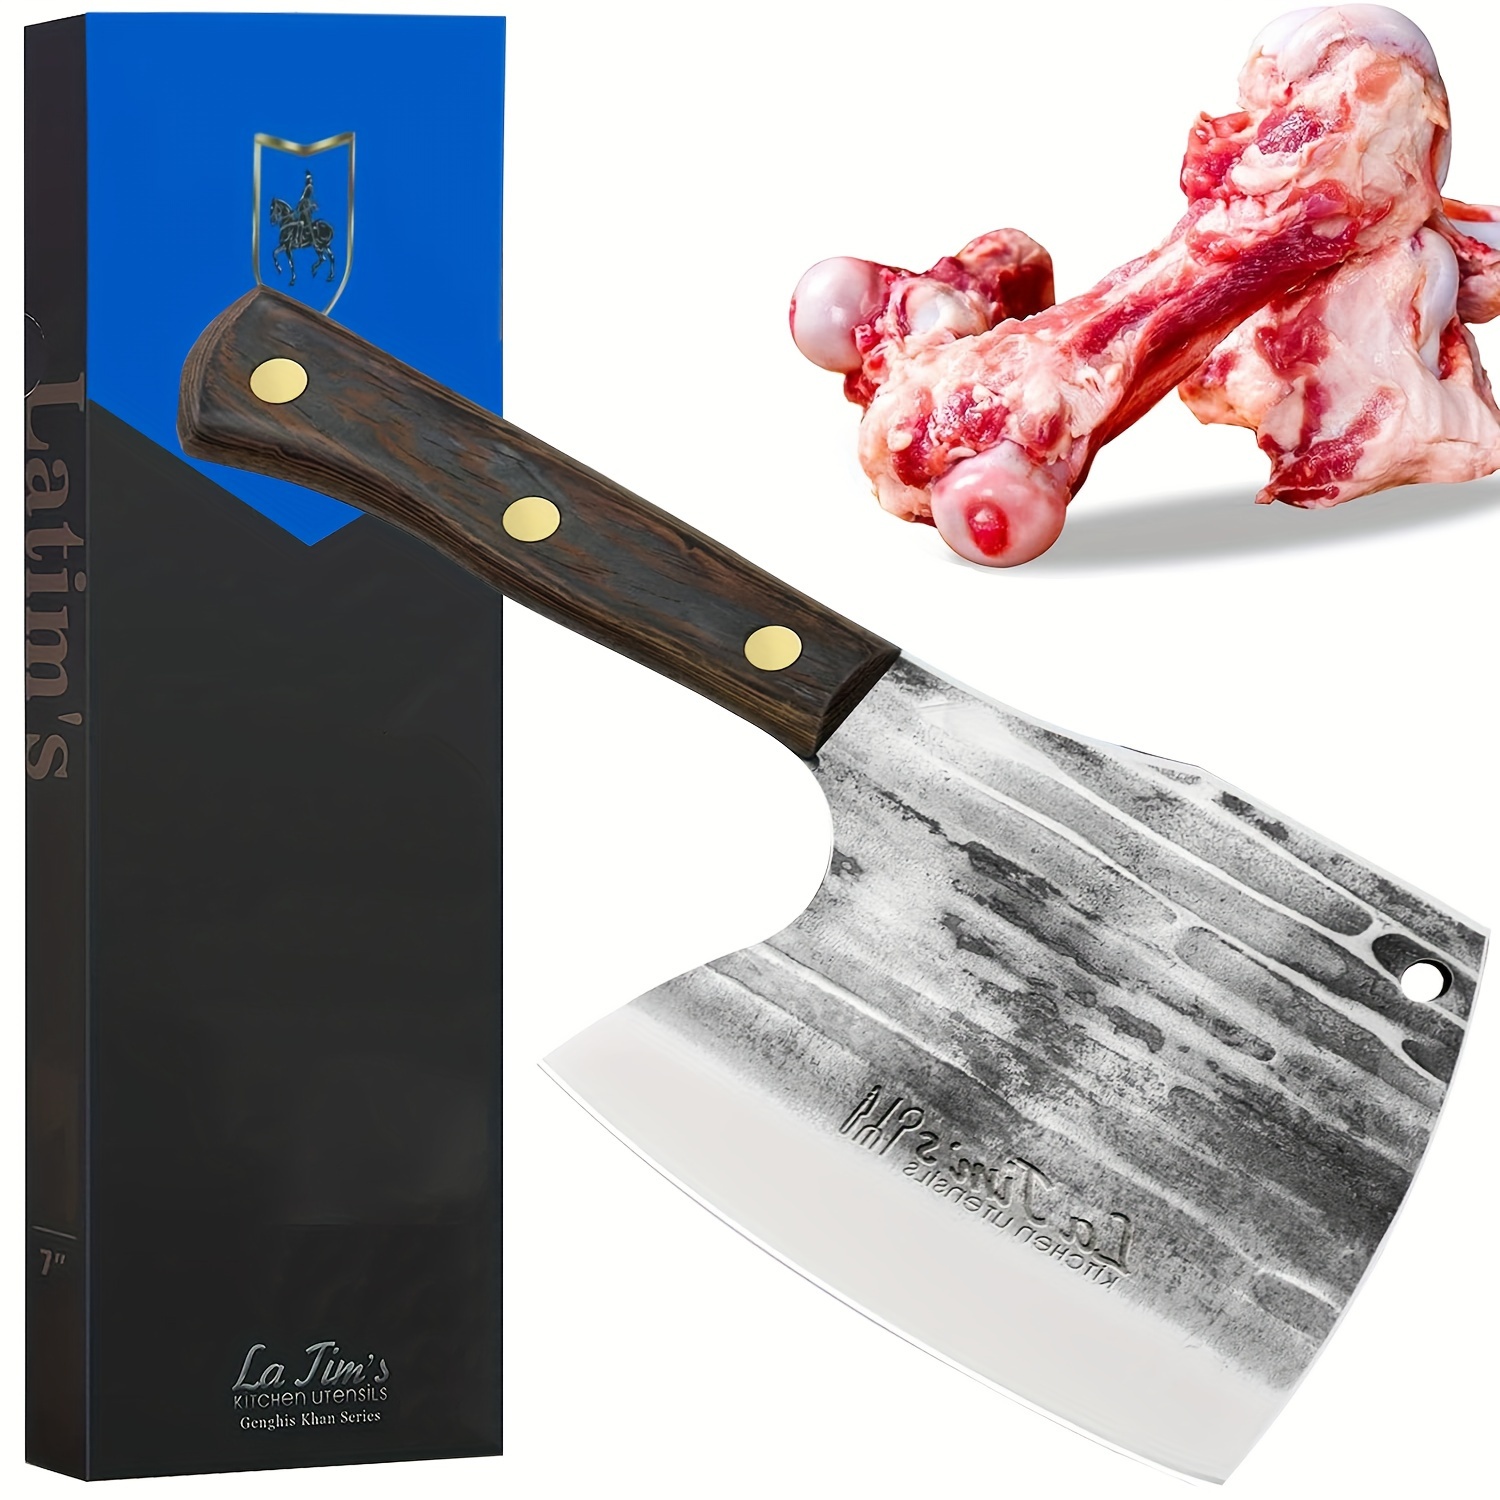 

Latim Meat Cleaver - 7'' Heavy Duty Butcher Knife Meat Chopper Bone Cutting Knife - High Carbon German Stainless Steel - Pearwood Handle For Home Kitchen And Restaurant With Gift Box